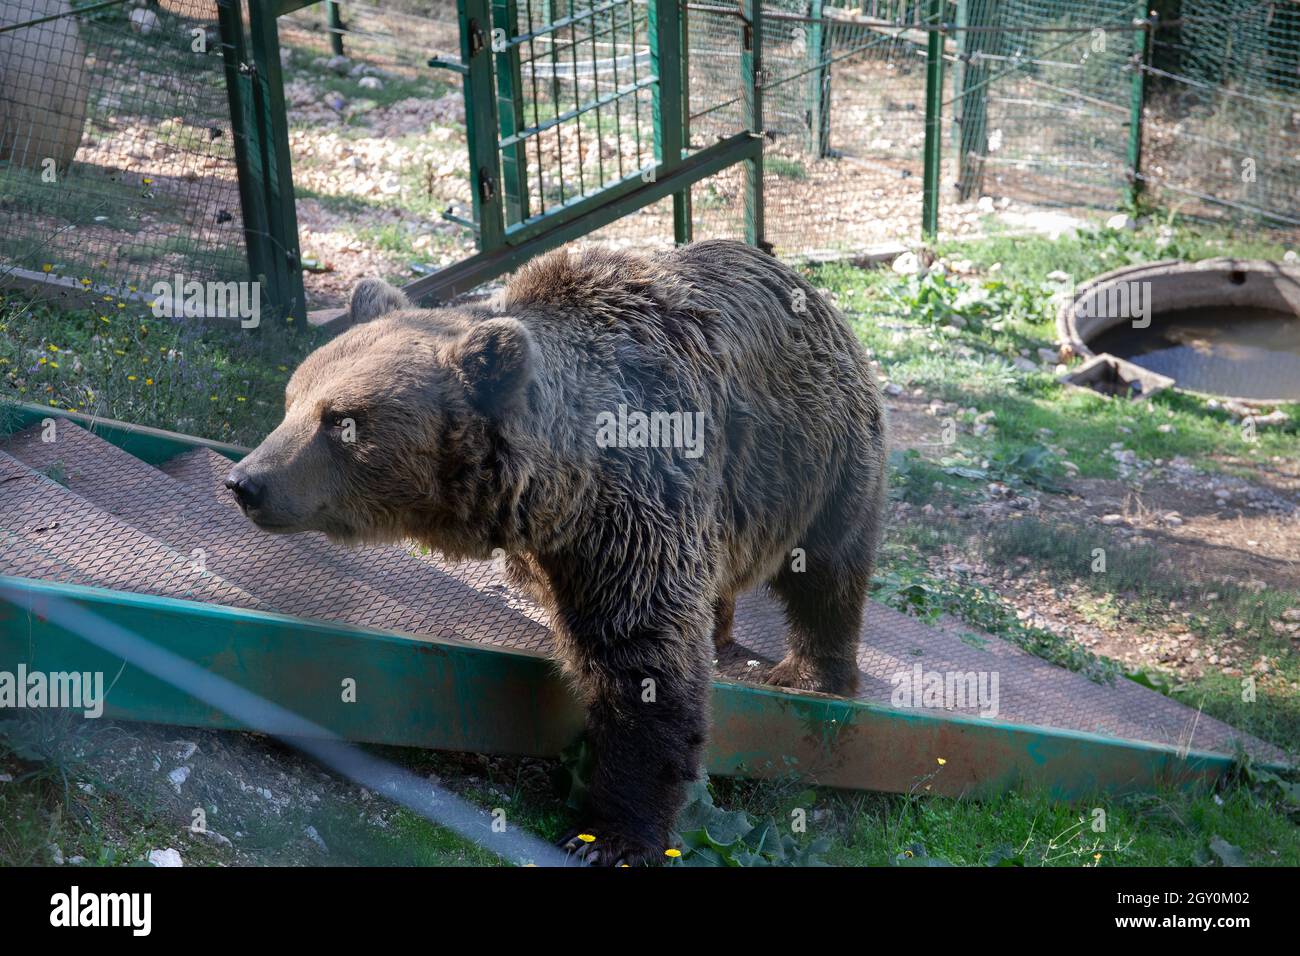 European brown bear in captivity, in an enclosed wildlife area. Stock Photo